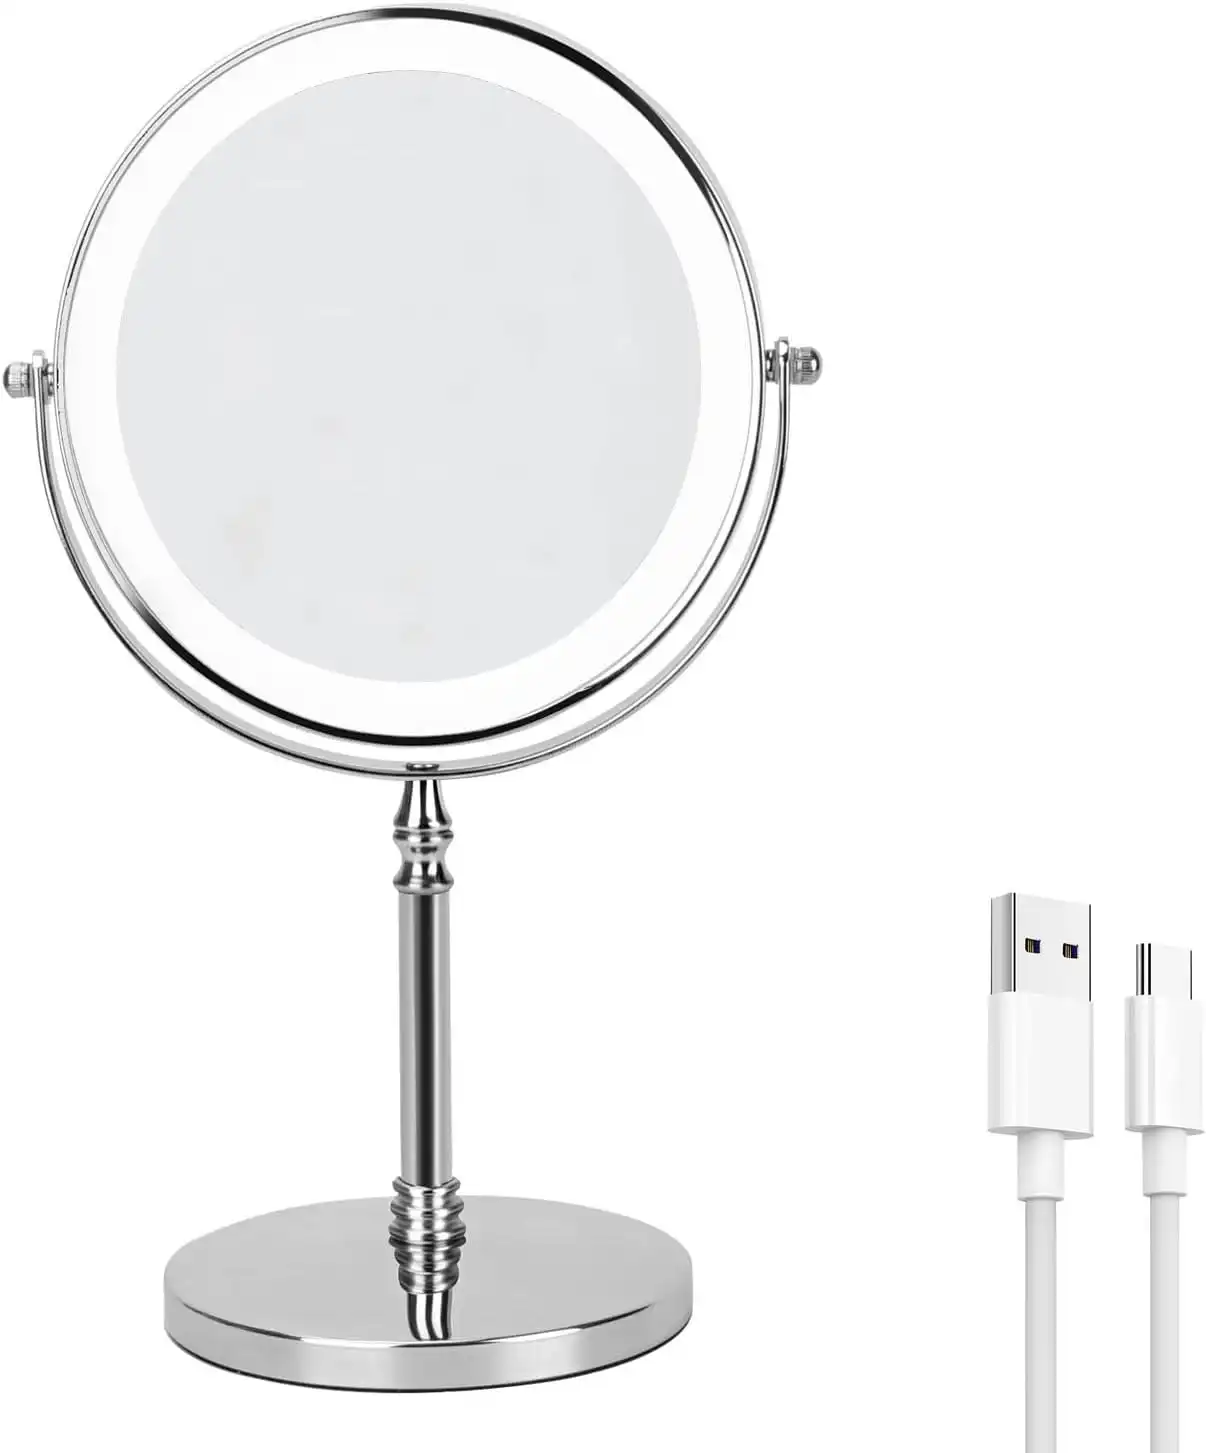 Rechargeable 20 cm Lighted Makeup Mirror, 3 Color Lighting Modes, 10x Magnification LED Vanity Mirror, Dimmable Lights